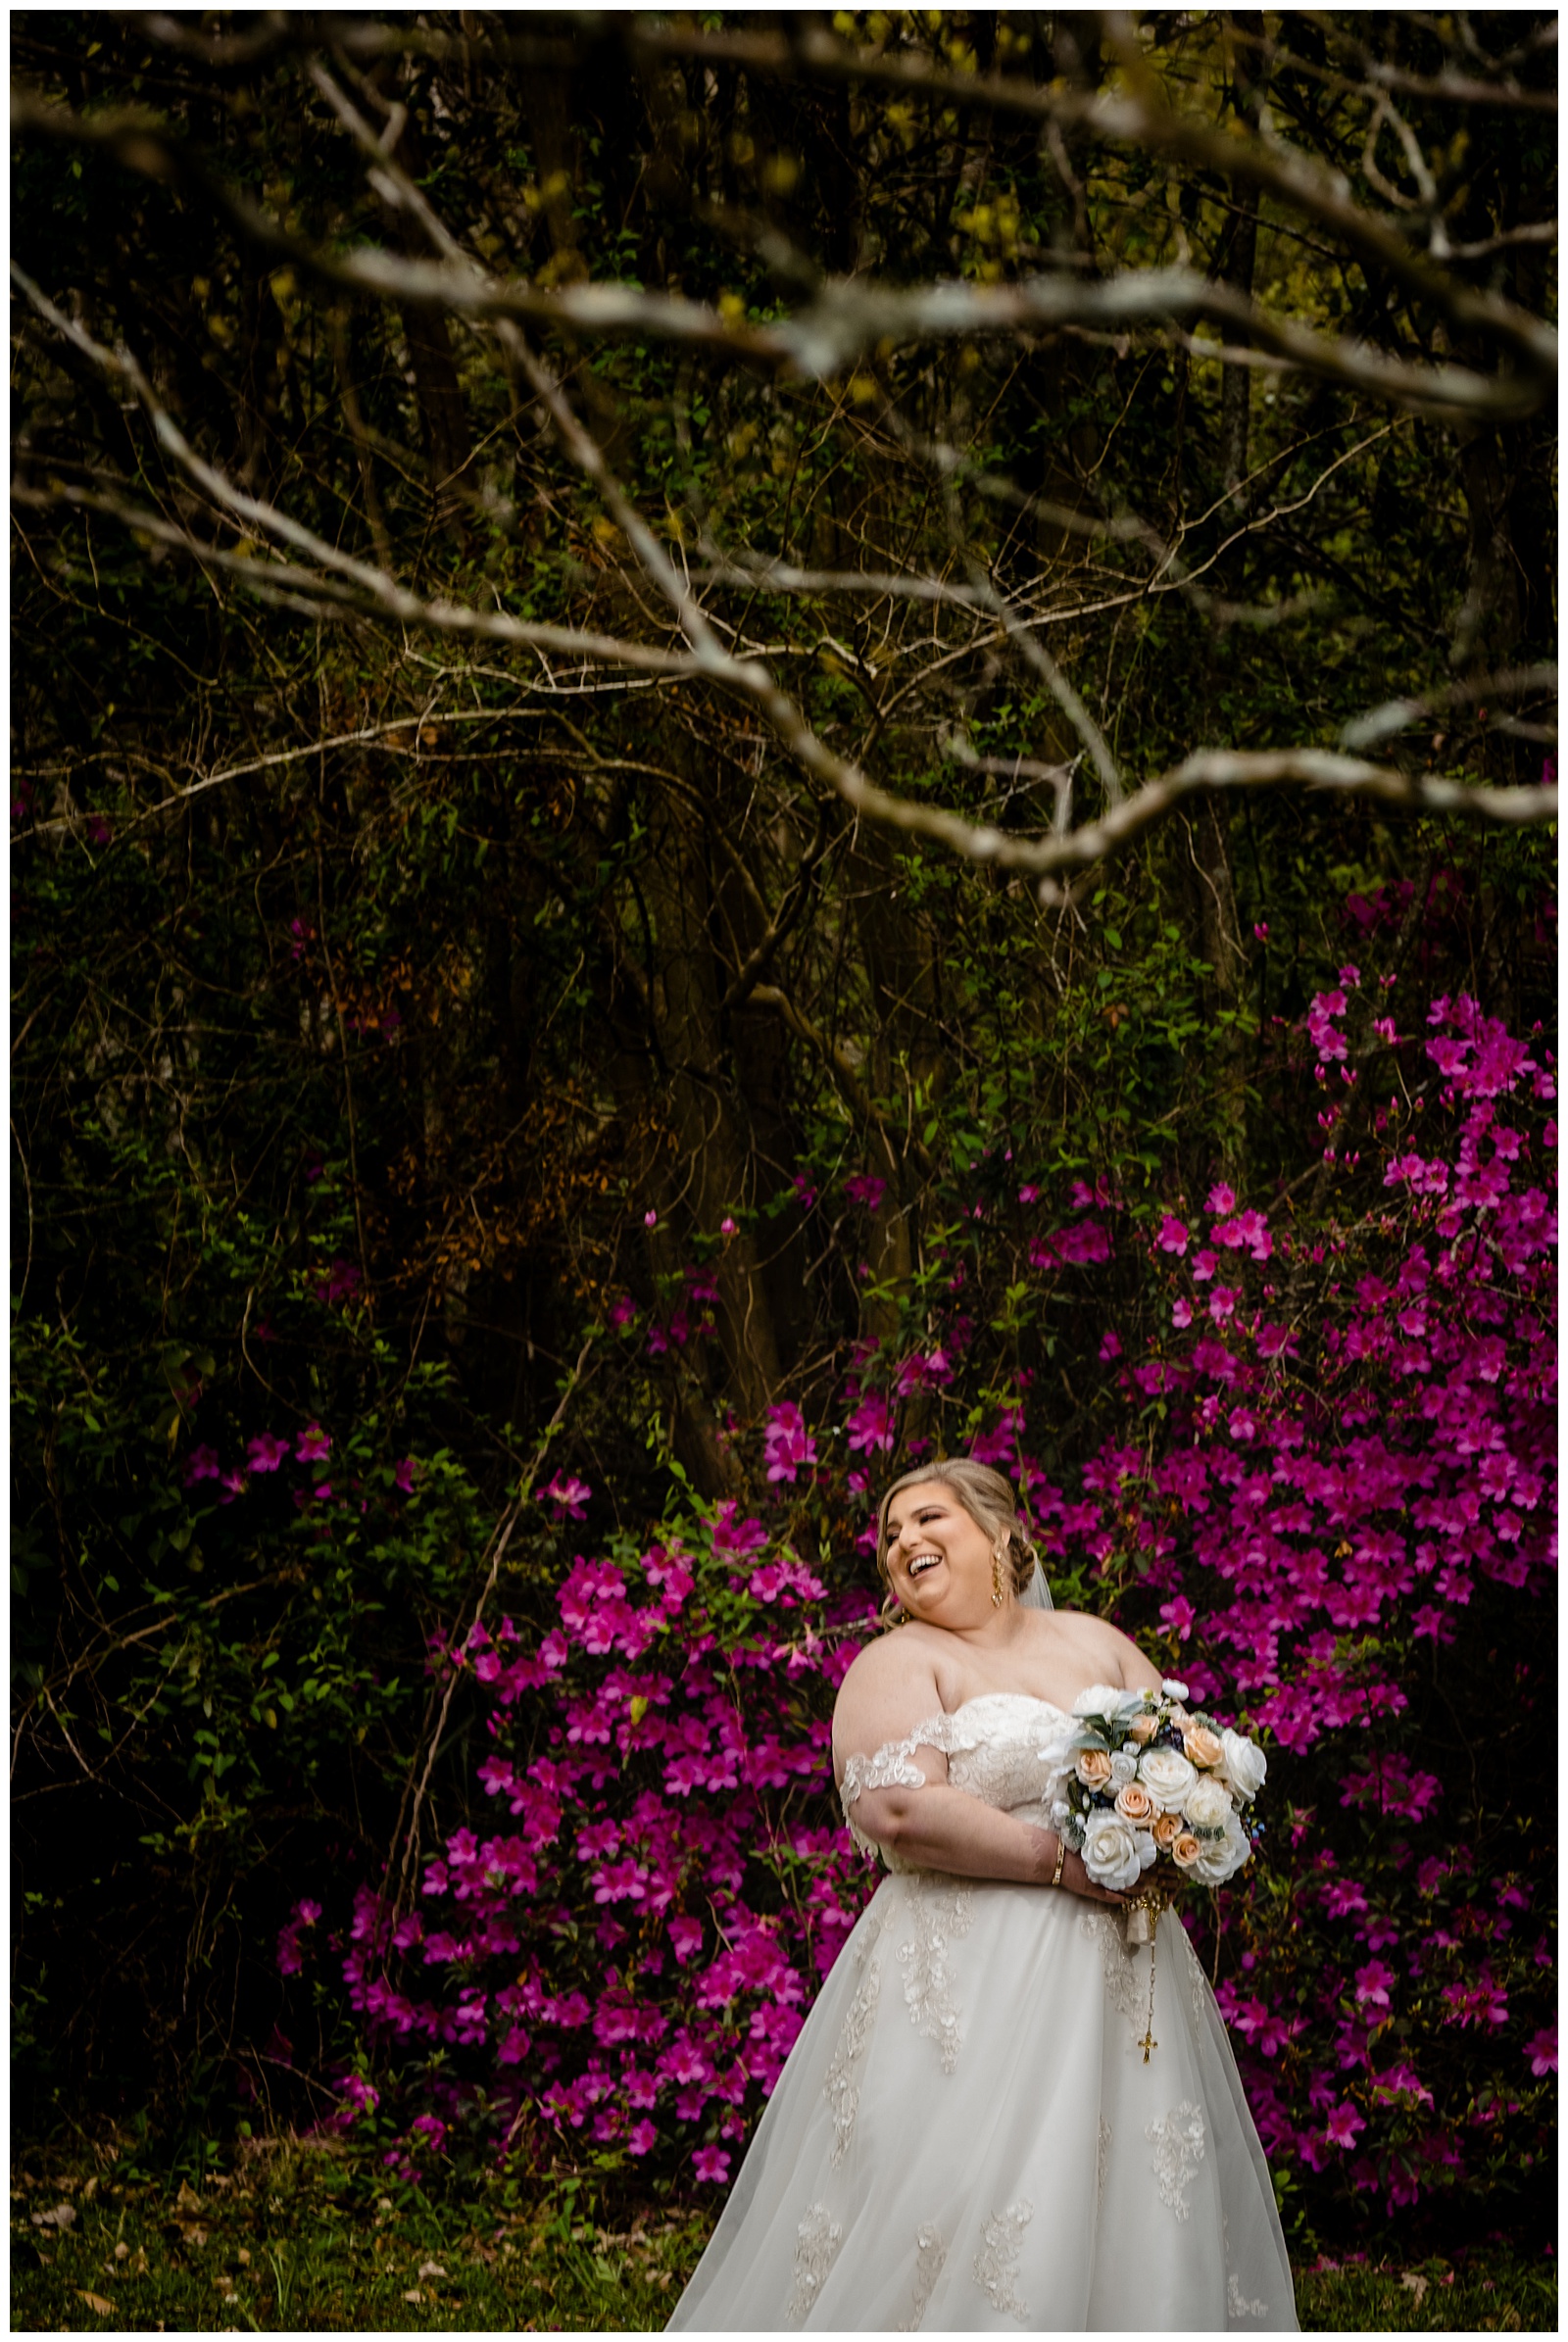 Outdoor bridal photography session at Barton Arboretum Trails in Baton Rouge